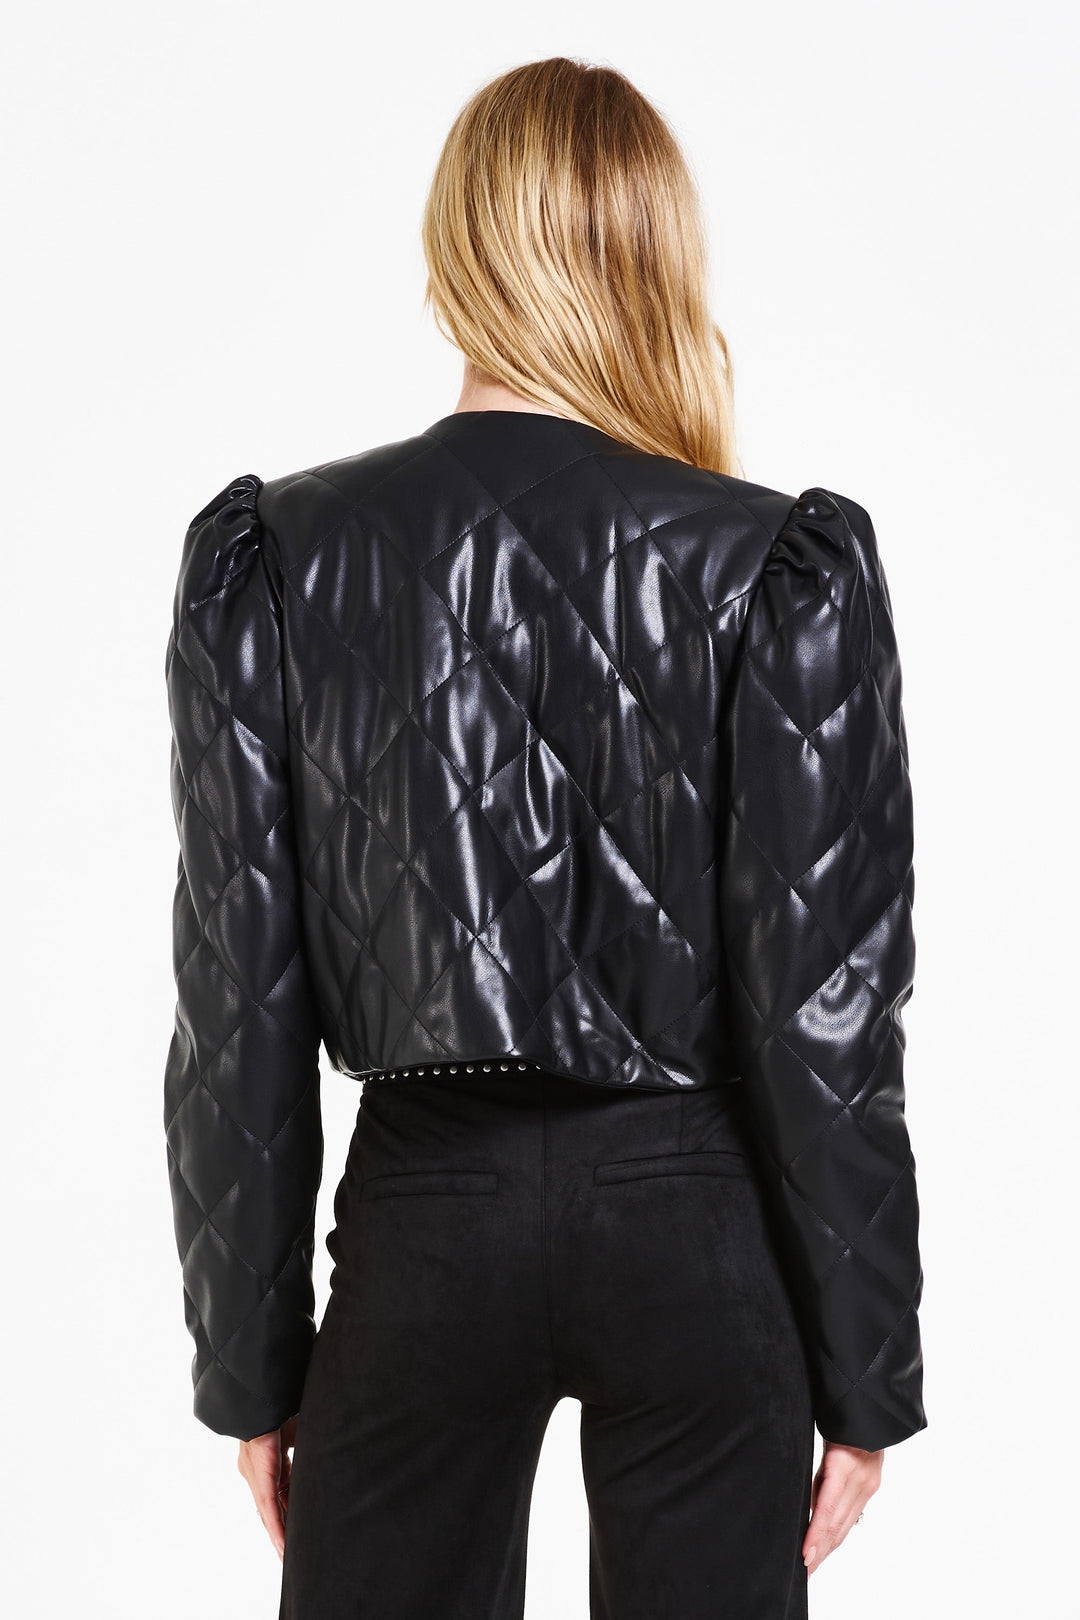 image of a female model wearing a OLYMPIA CROPPED JACKET BLACK QUILTED JACKETS